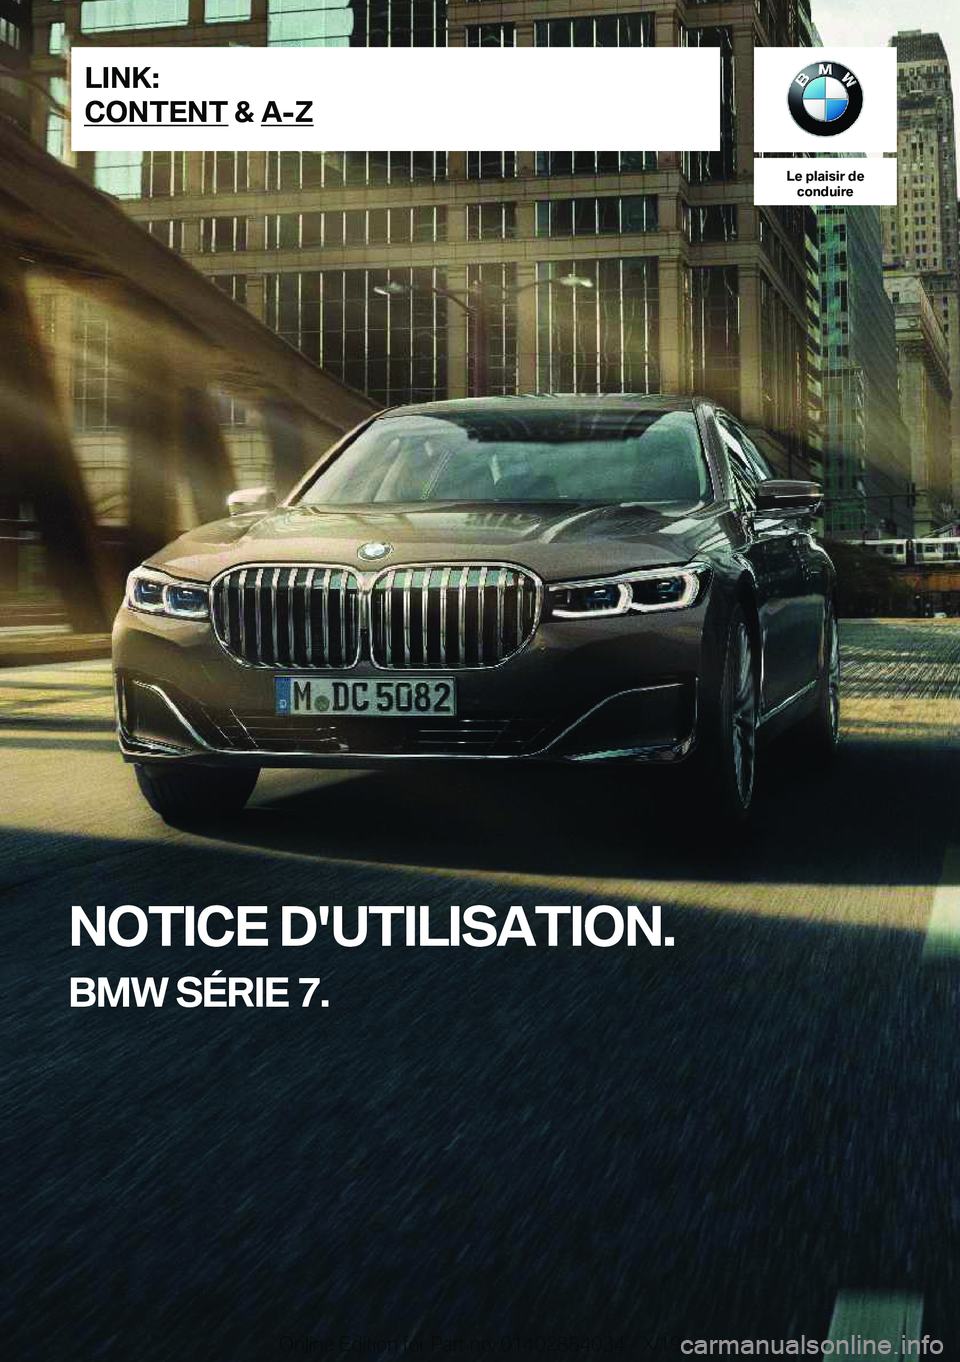 BMW 7 SERIES 2020  Notices Demploi (in French) �L�e��p�l�a�i�s�i�r��d�e�c�o�n�d�u�i�r�e
�N�O�T�I�C�E��D�'�U�T�I�L�I�S�A�T�I�O�N�.
�B�M�W��S�É�R�I�E��7�.�L�I�N�K�:
�C�O�N�T�E�N�T��&��A�-�Z�O�n�l�i�n�e��E�d�i�t�i�o�n��f�o�r��P�a�r�t�